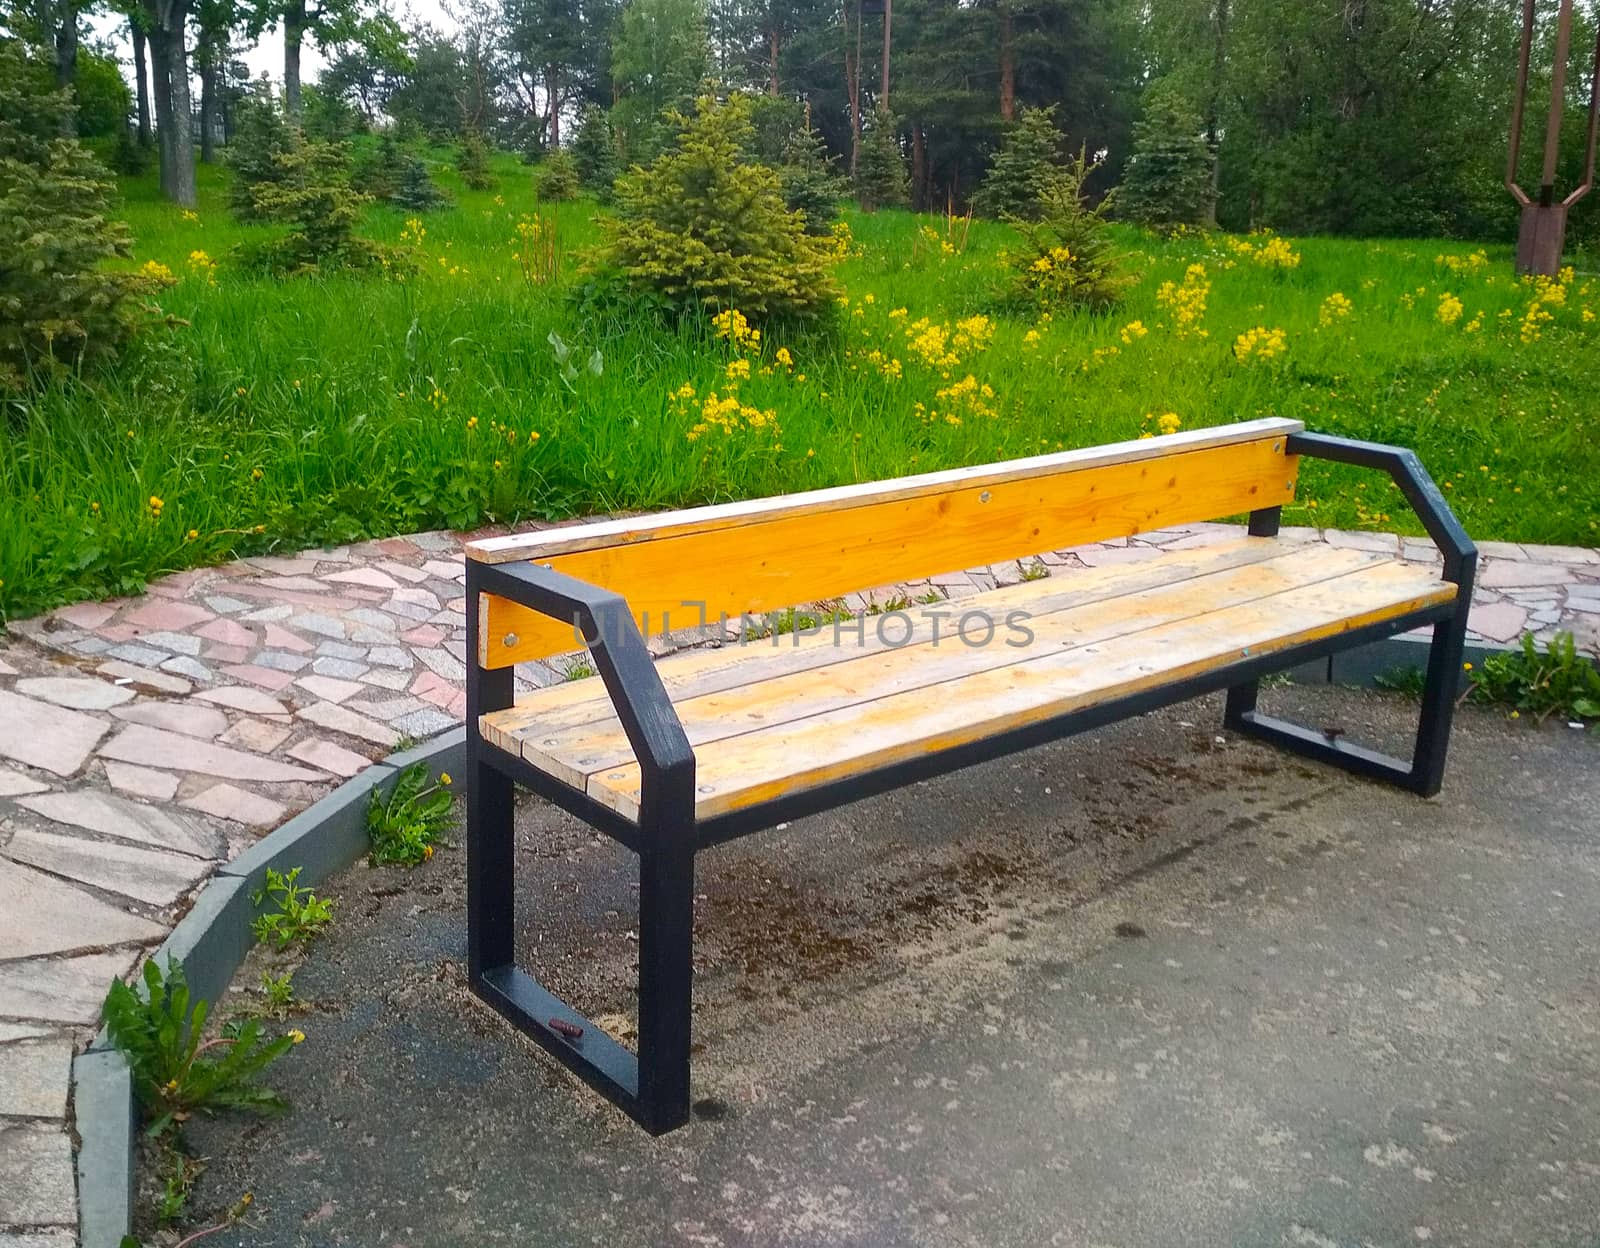 A wooden bench with a metal frame in the Park at an angle to the viewer.